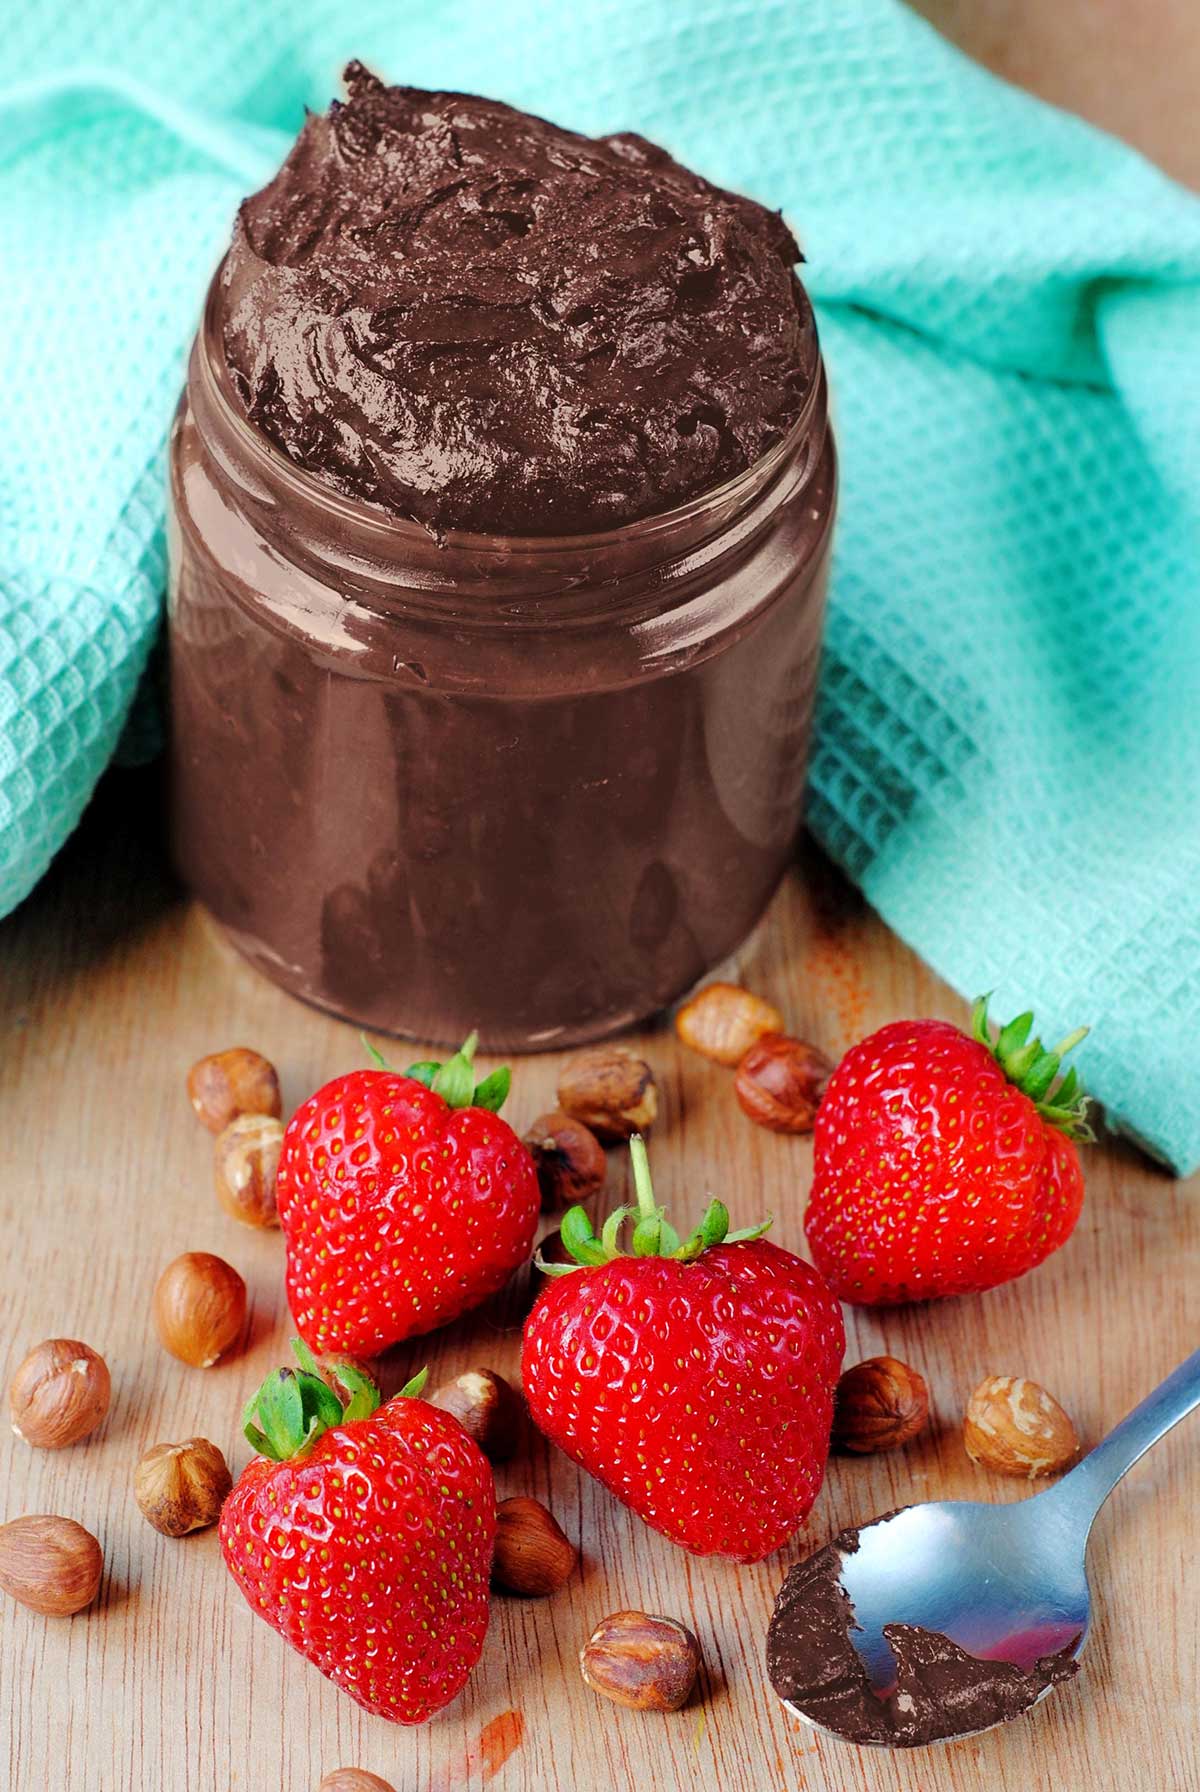 A jar of homemade nutella with some strawberries.